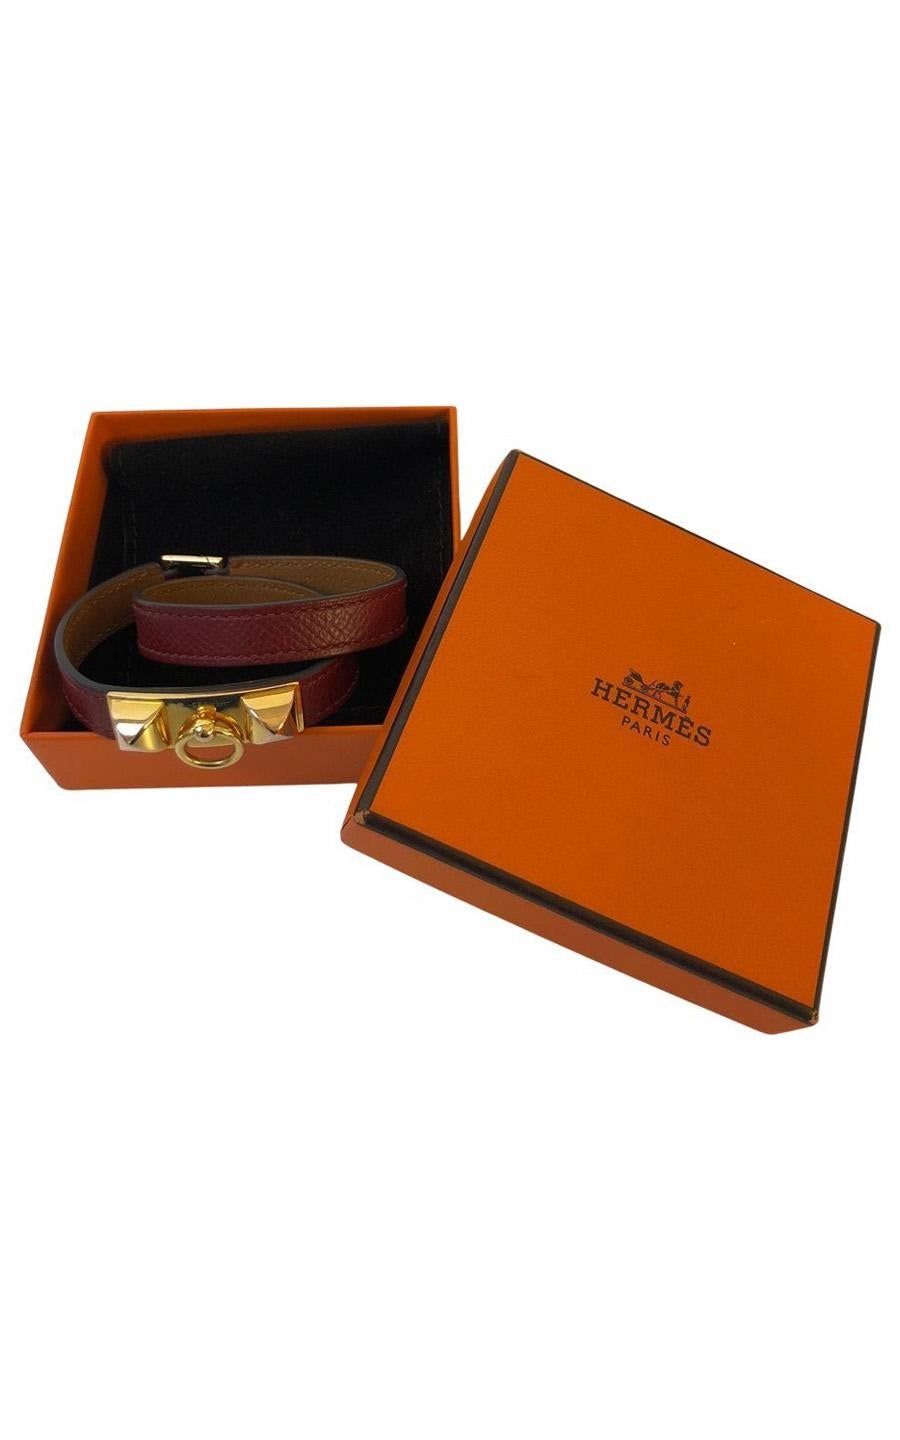 Hermès Rivale Double Tour Bracelet in red / Burgundy Epsom Leather. The bracelet has gold-plated hardware. This bracelet is perfect for everyday use. This vintage bracelet is in great condition, considering the flawless state of the leather. It